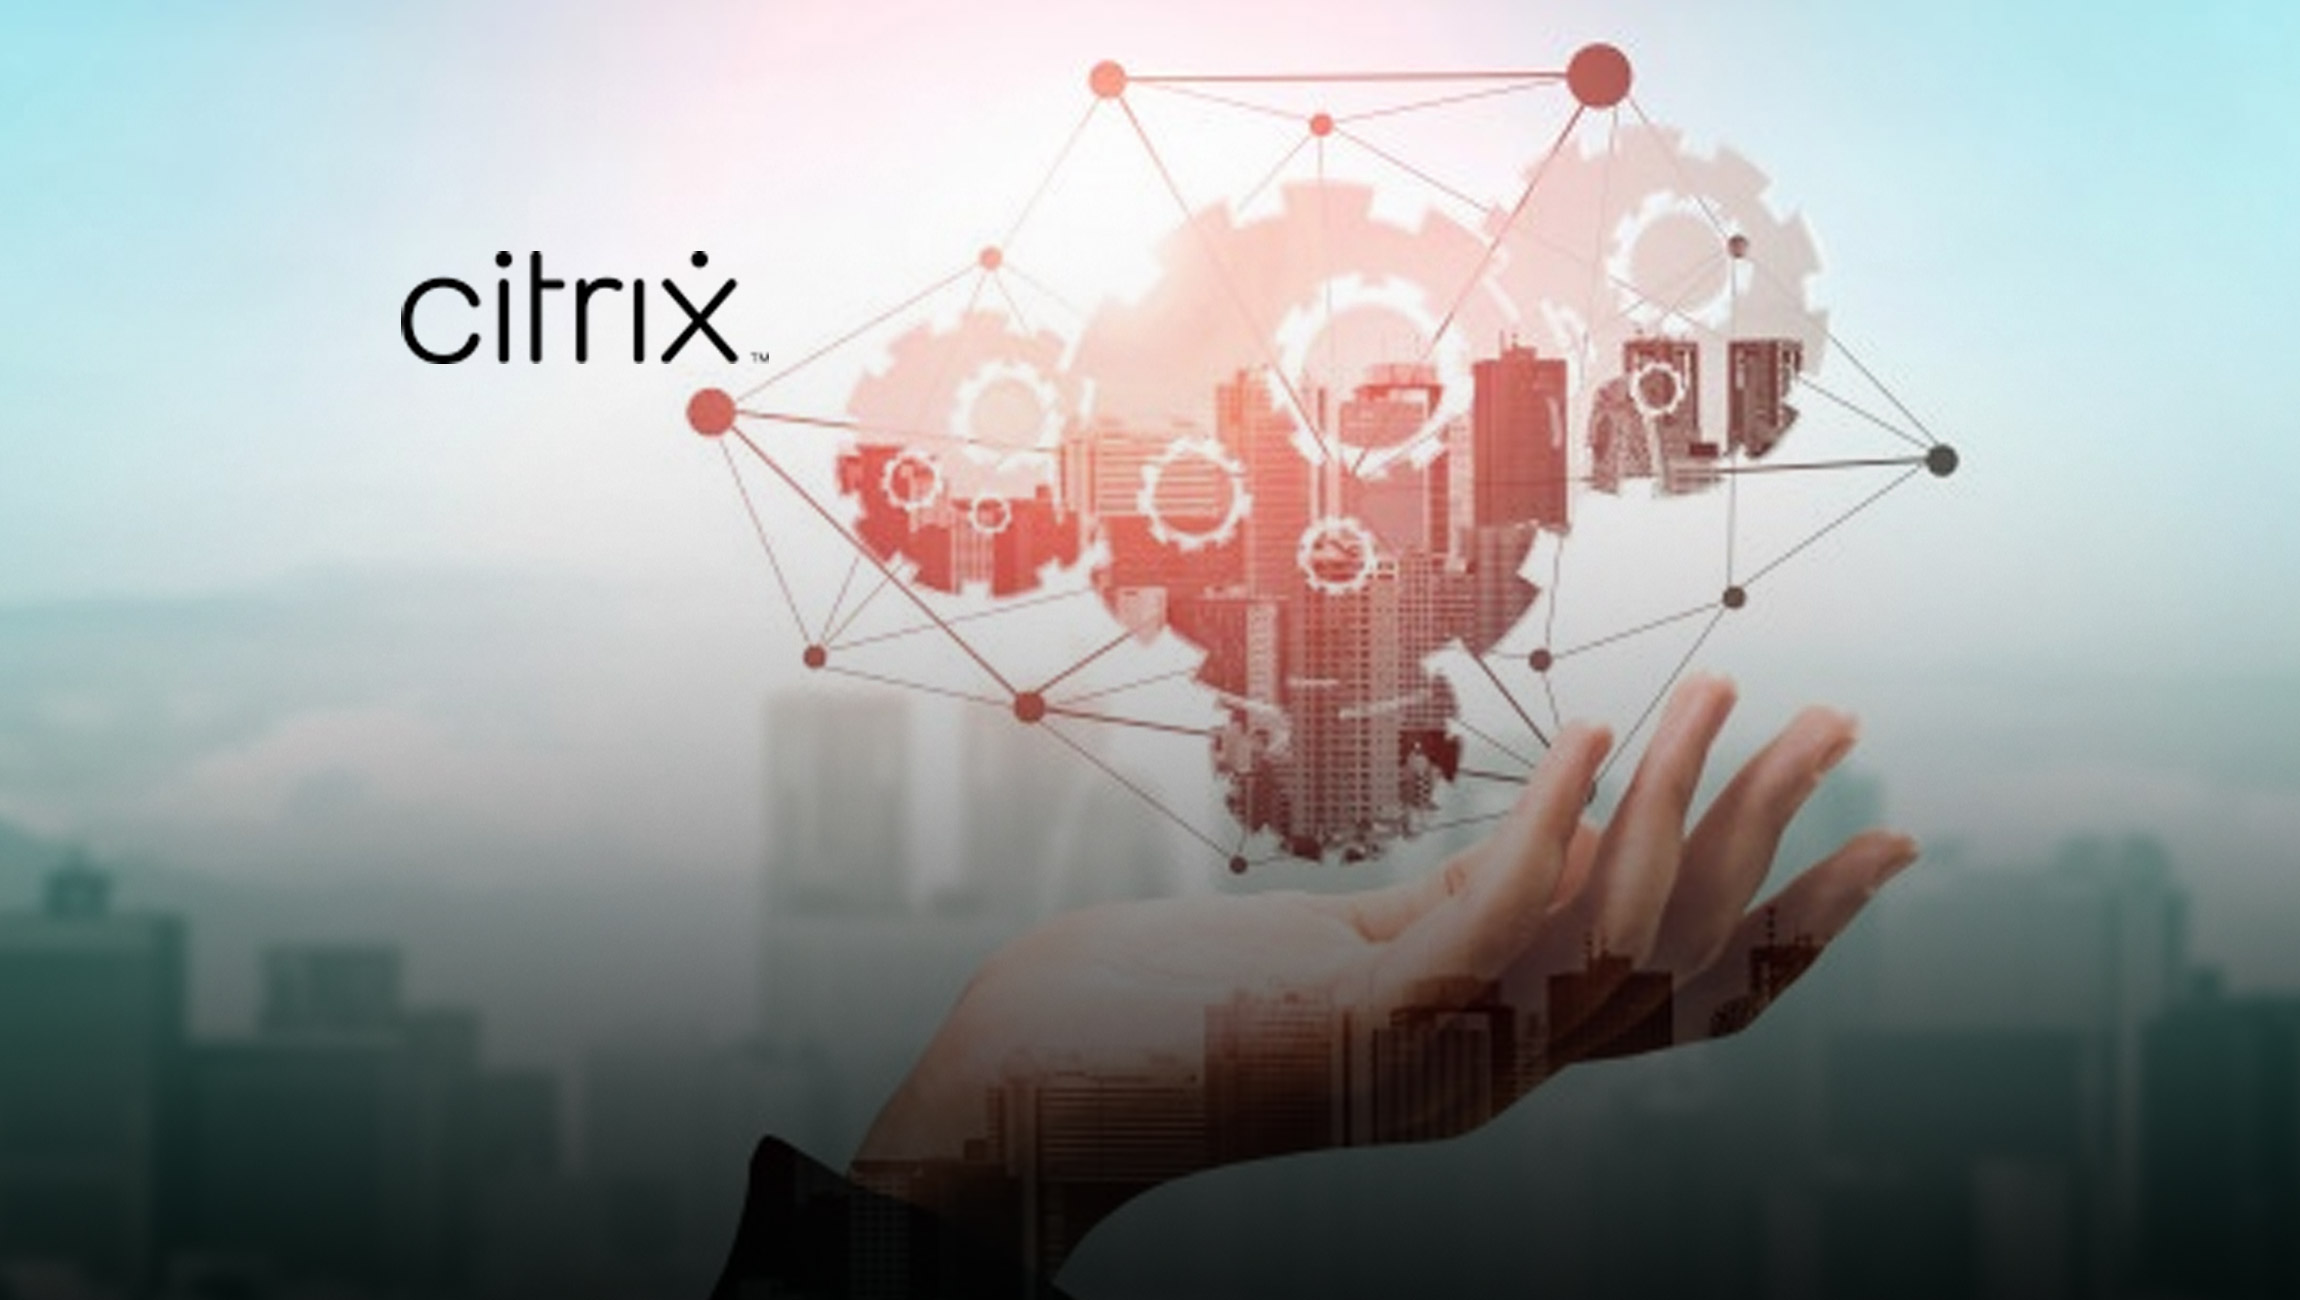 Citrix® Named a 2021 Gartner Peer Insights Customers’ Choice for Unified Endpoint Management